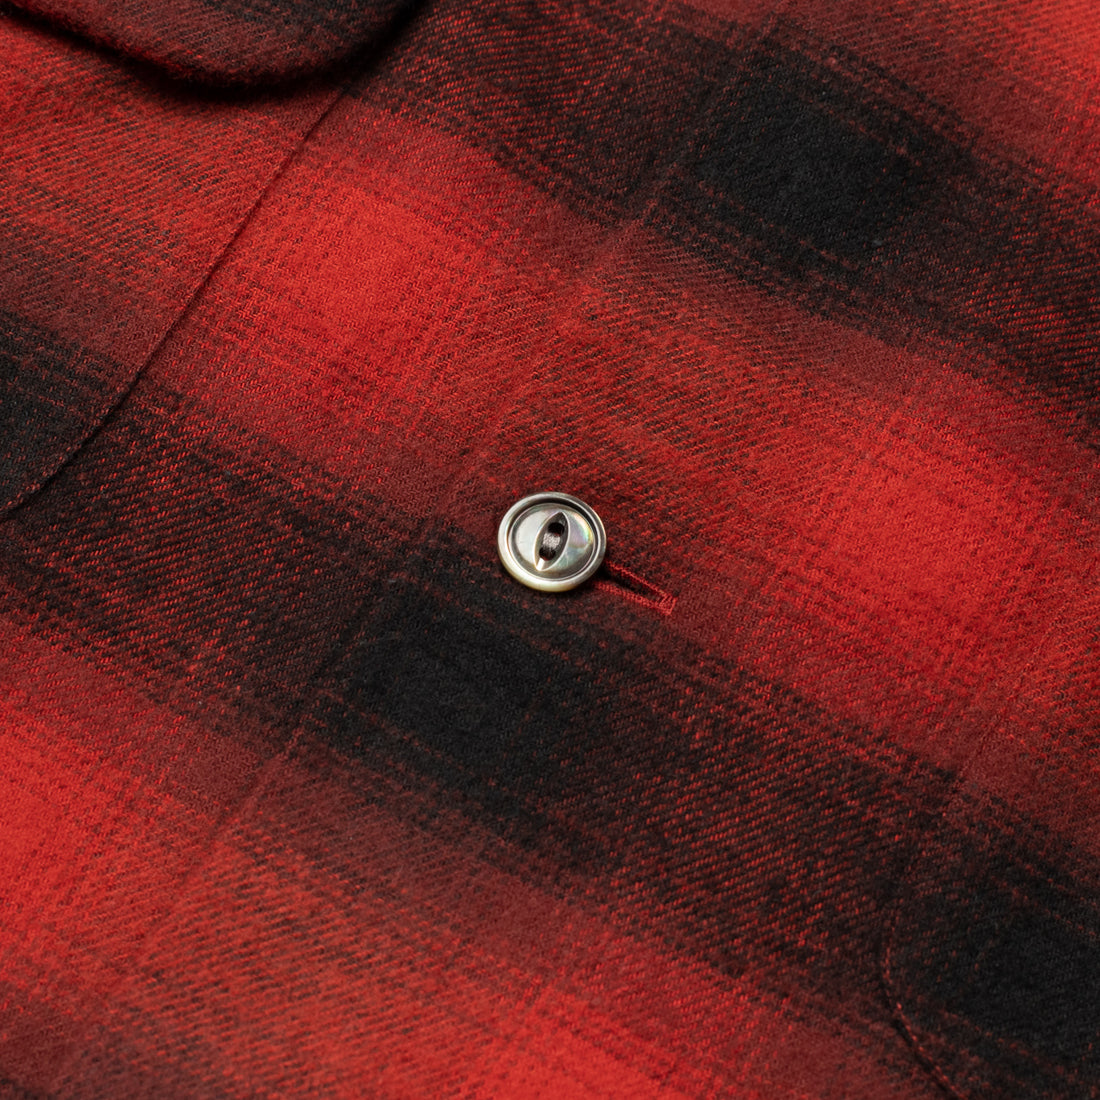 Bryceland's Brushed Cotton Sports Shirt Red Plaid